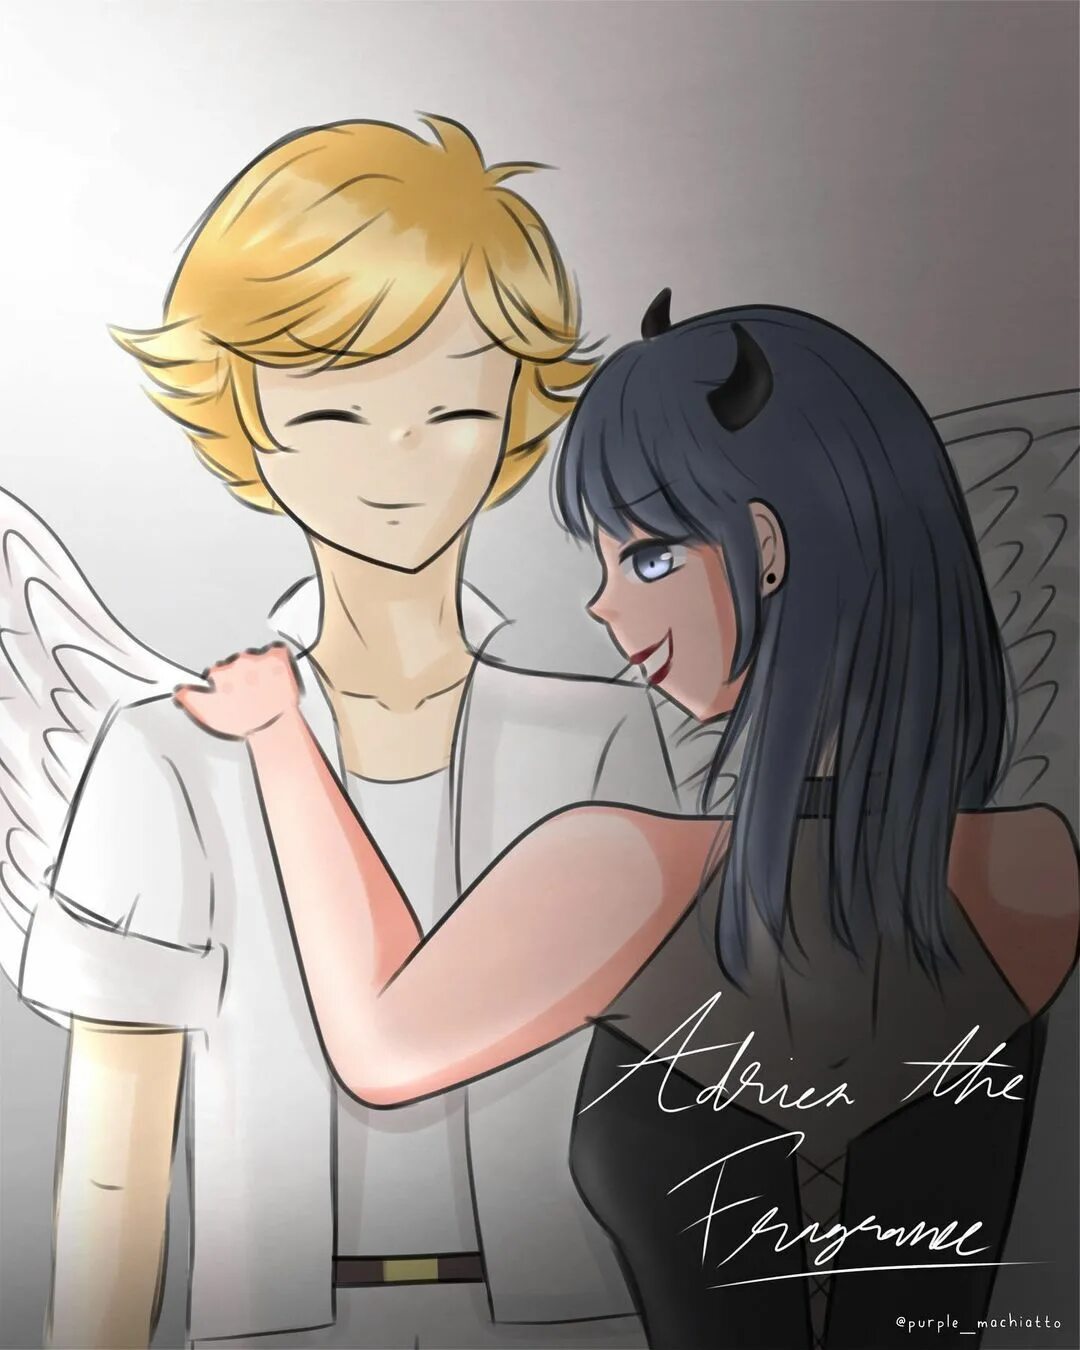 Cia в Instagram: "If Adrien and Marinette had a photoshoot together fo...